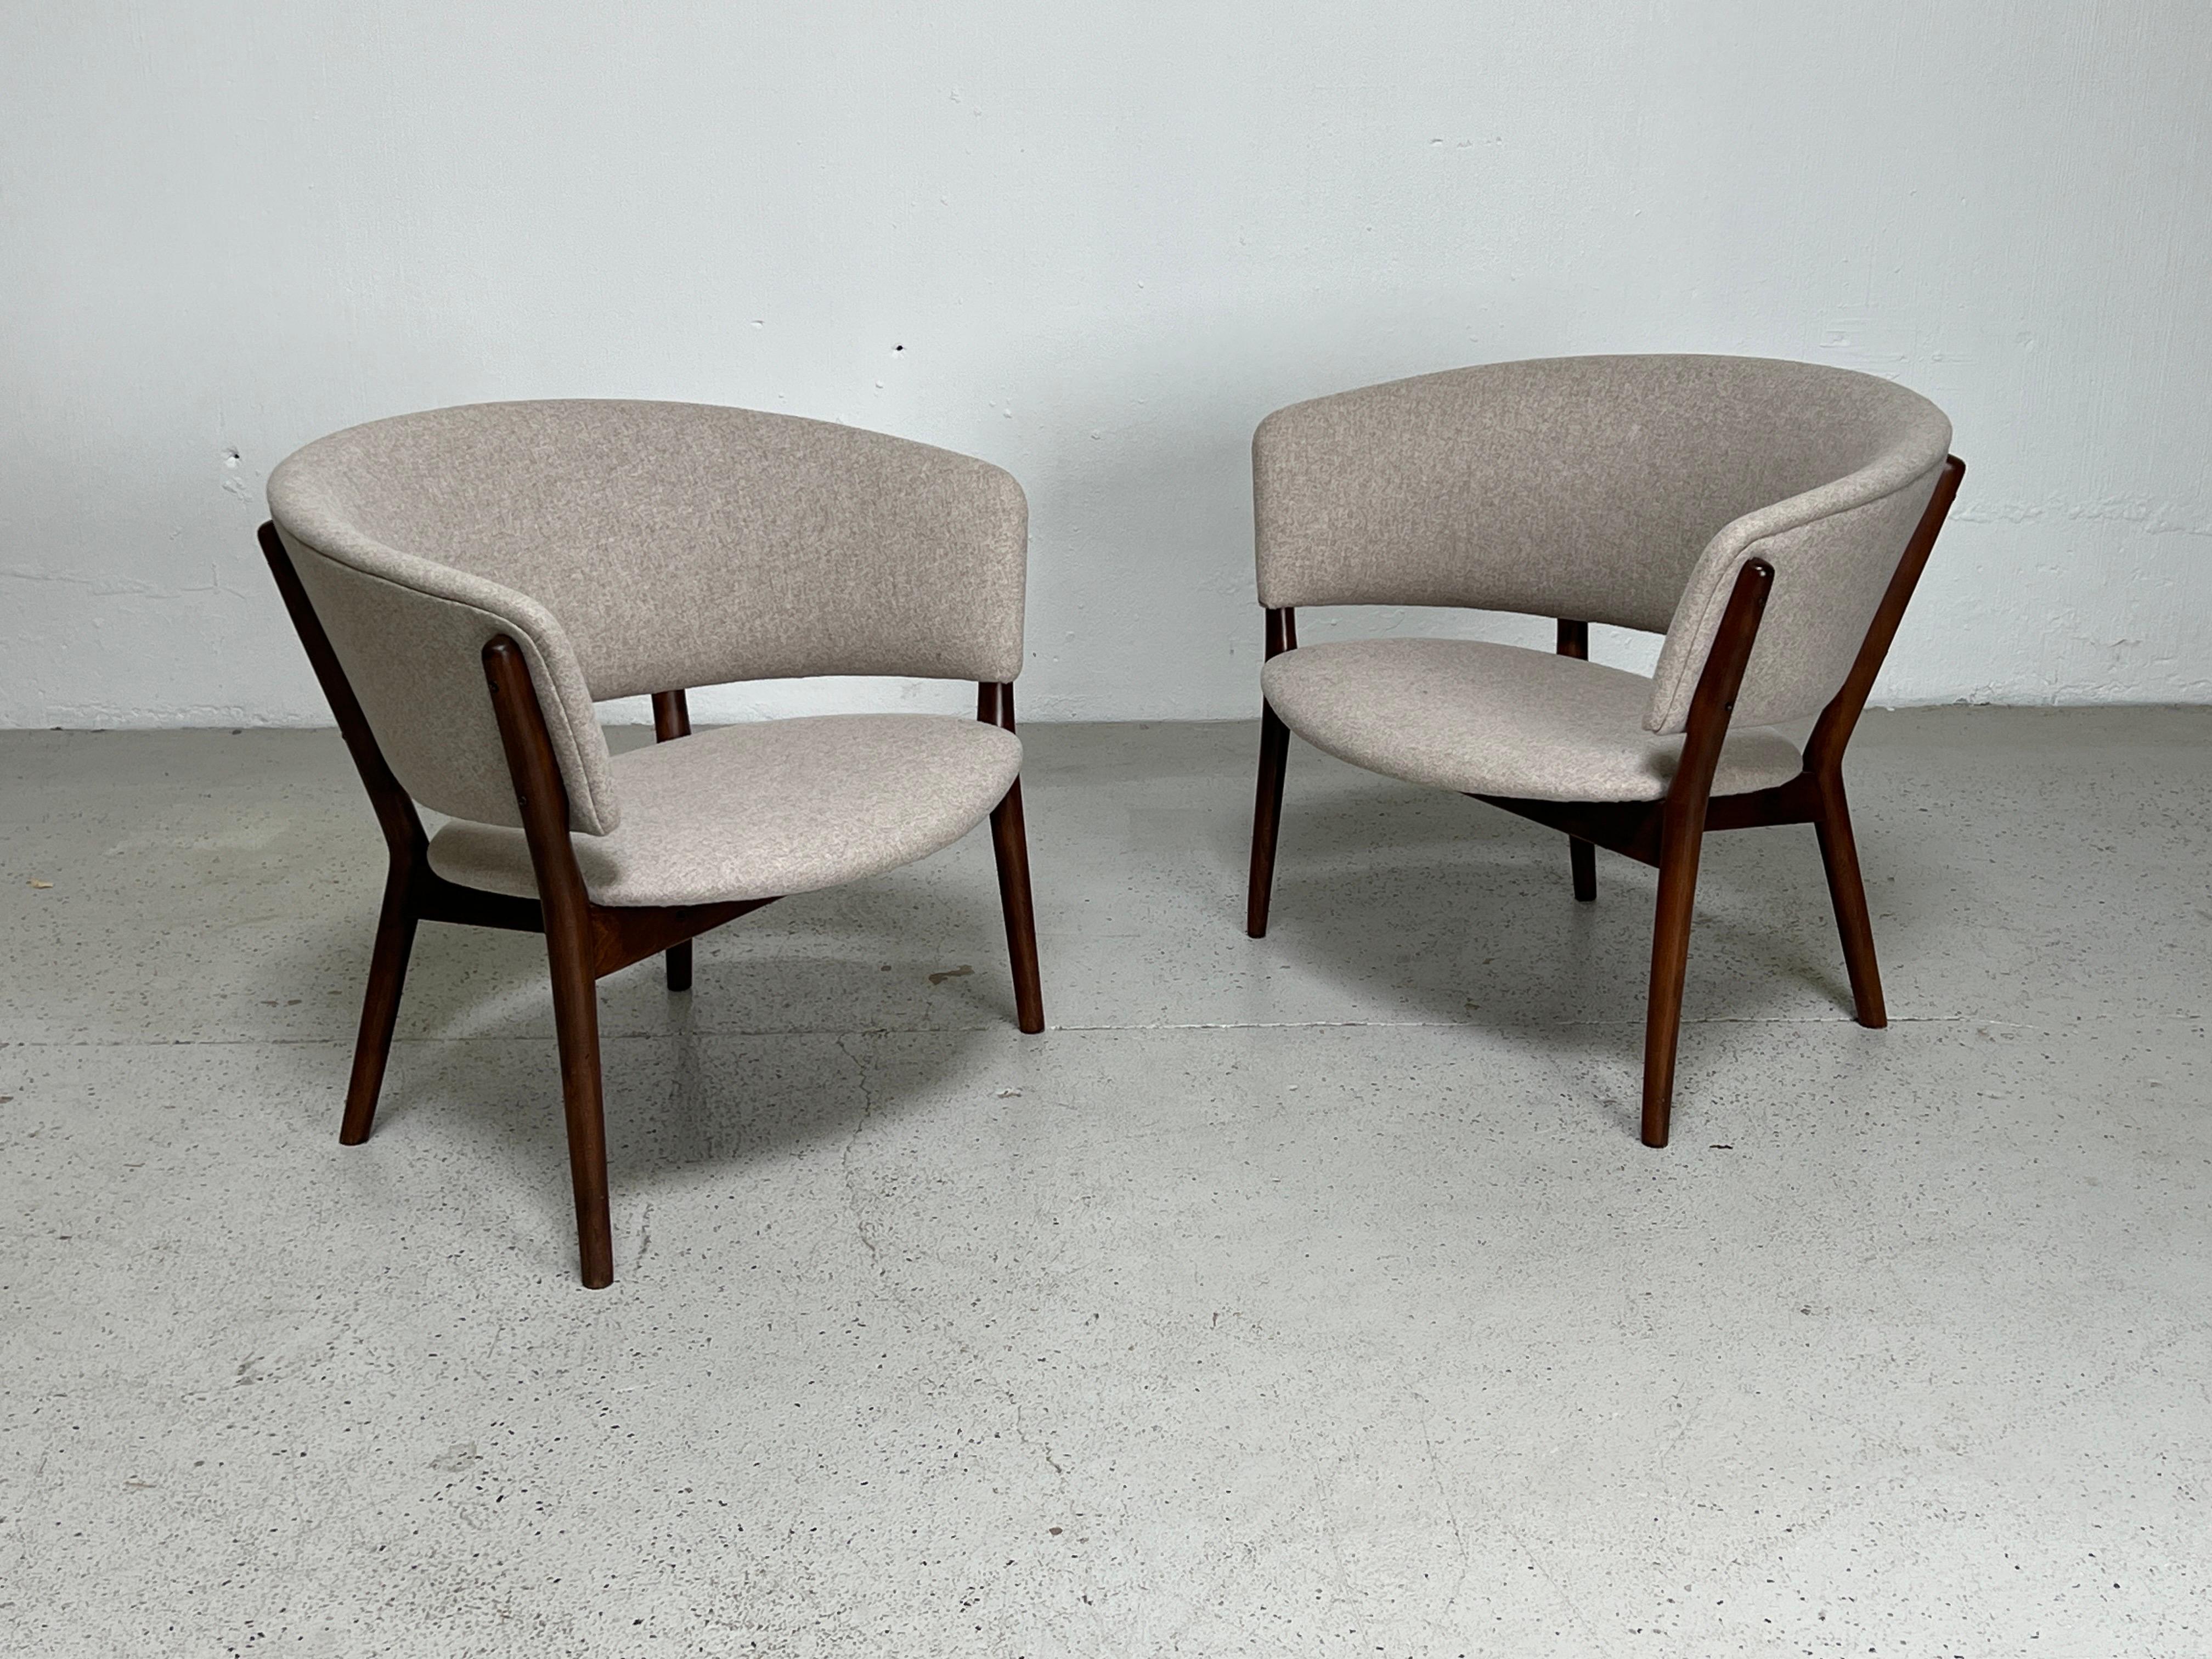 A pair of lounge chairs designed by Nanna Ditzel.